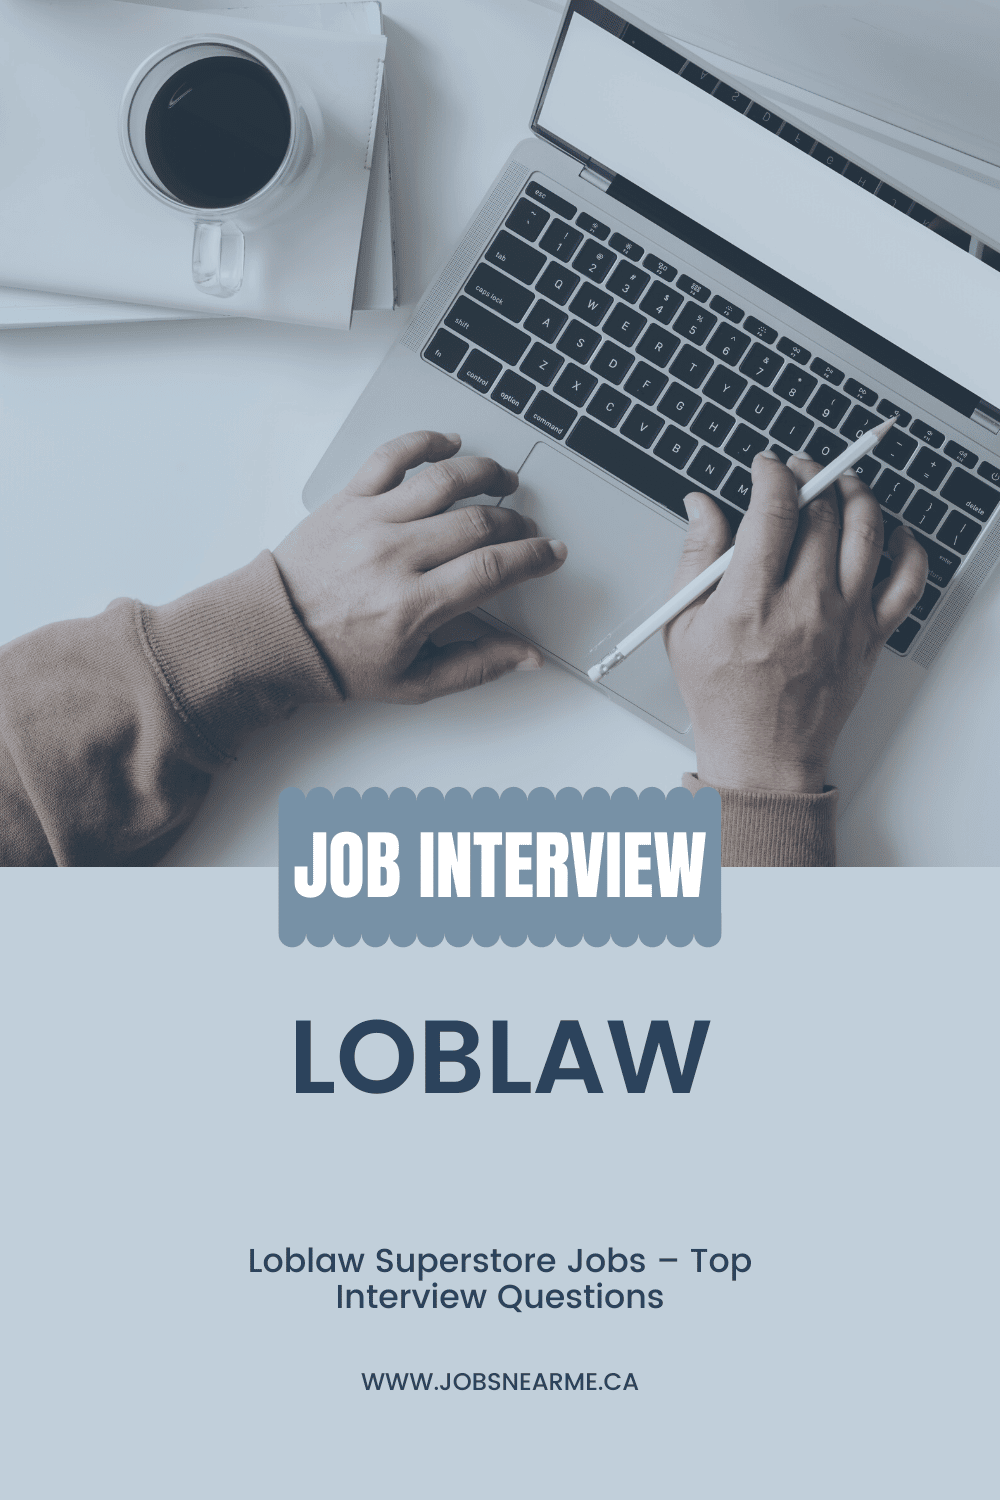 Loblaw Superstore Jobs – Top Interview Questions